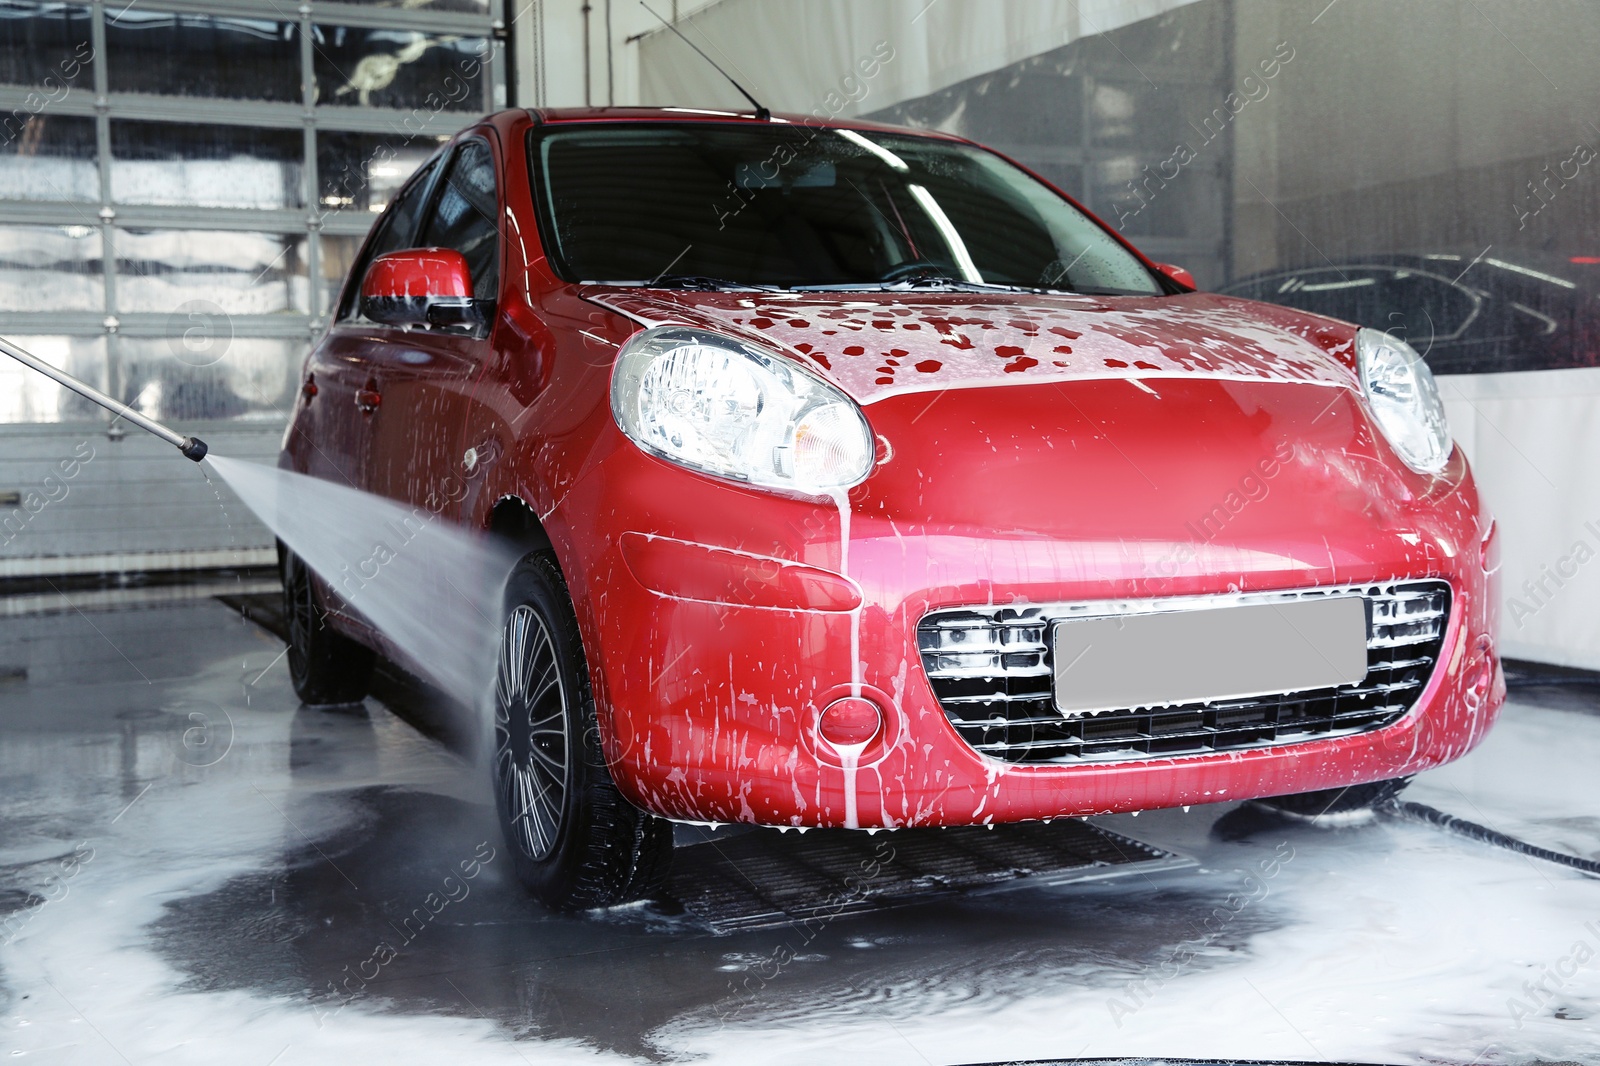 Photo of Cleaning modern automobile with high pressure water jet at car wash